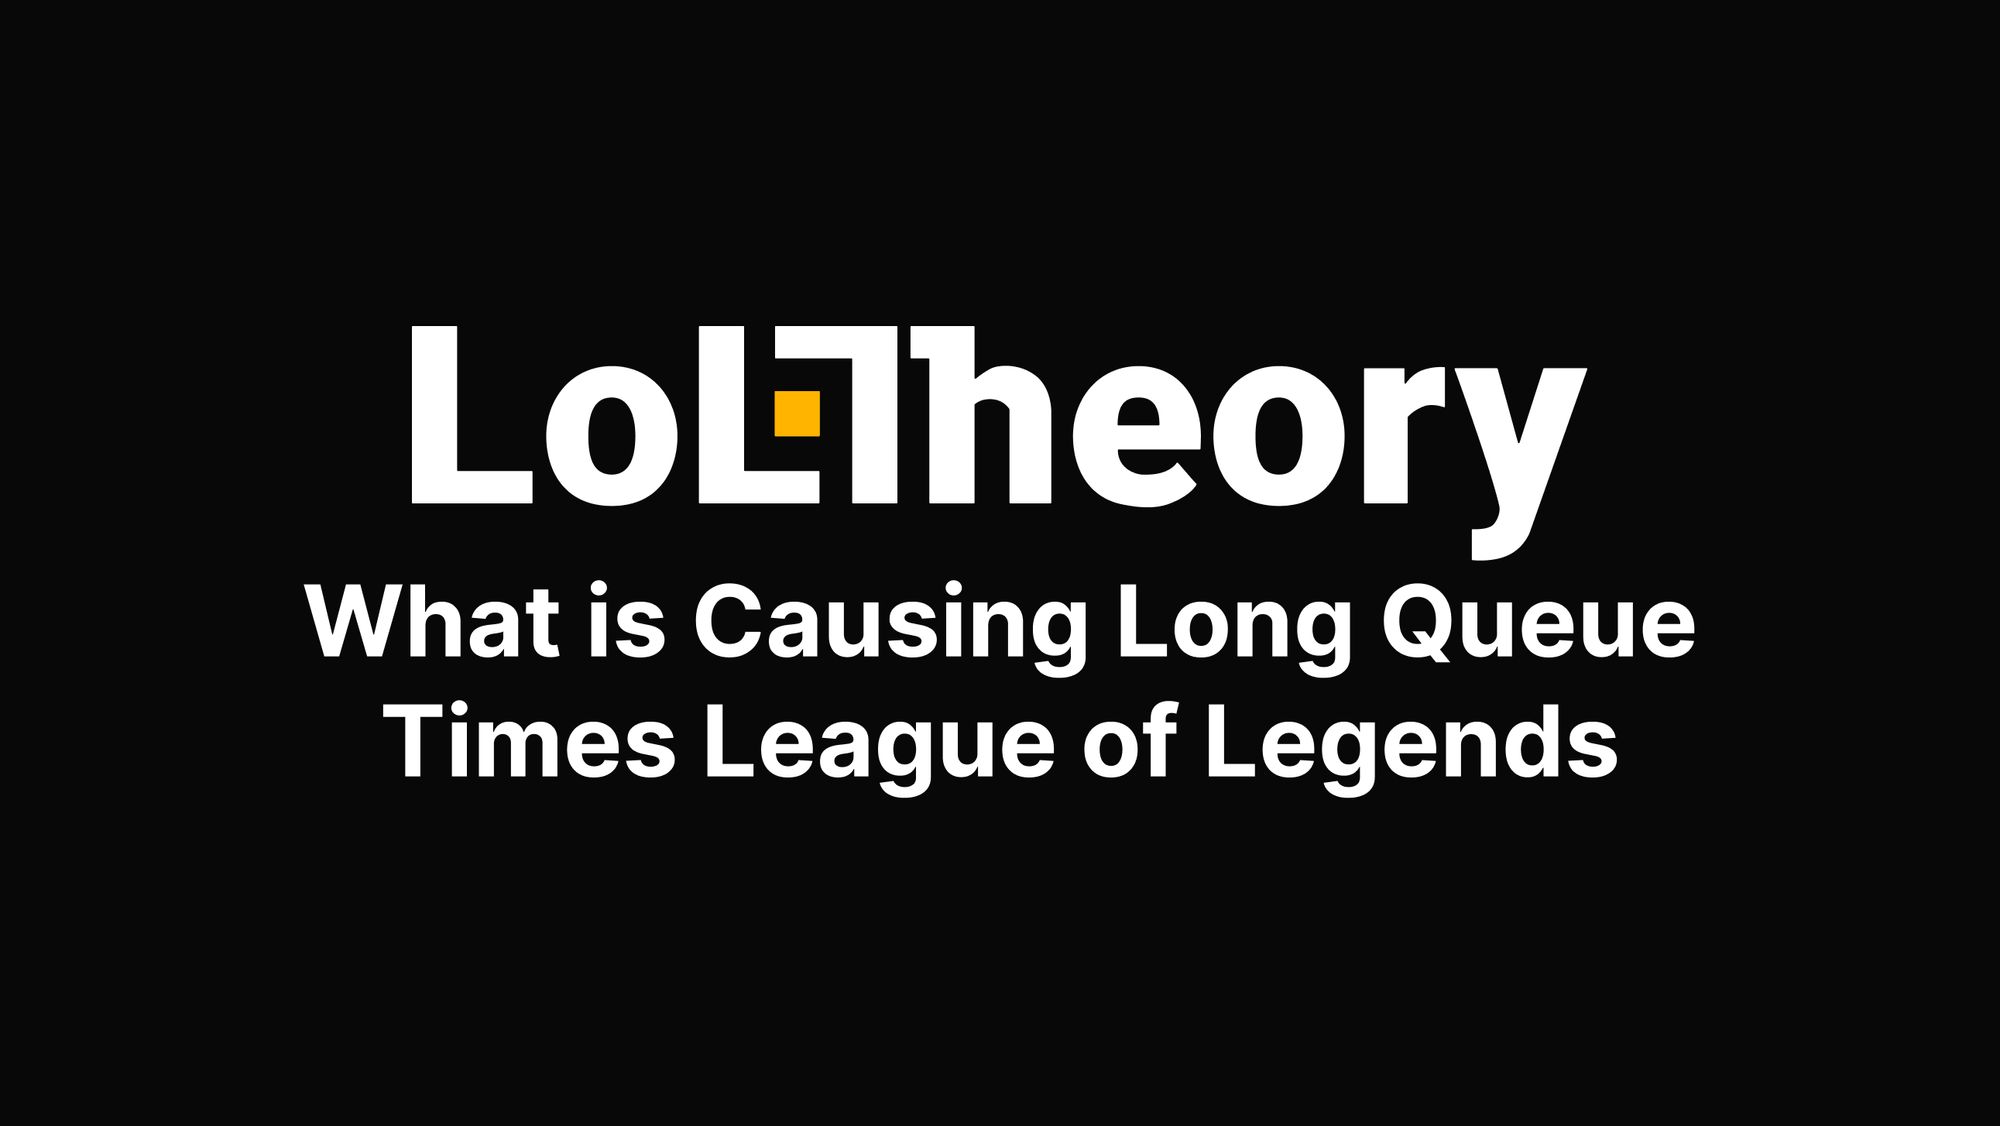 What is Causing Long Queue Times League of Legends